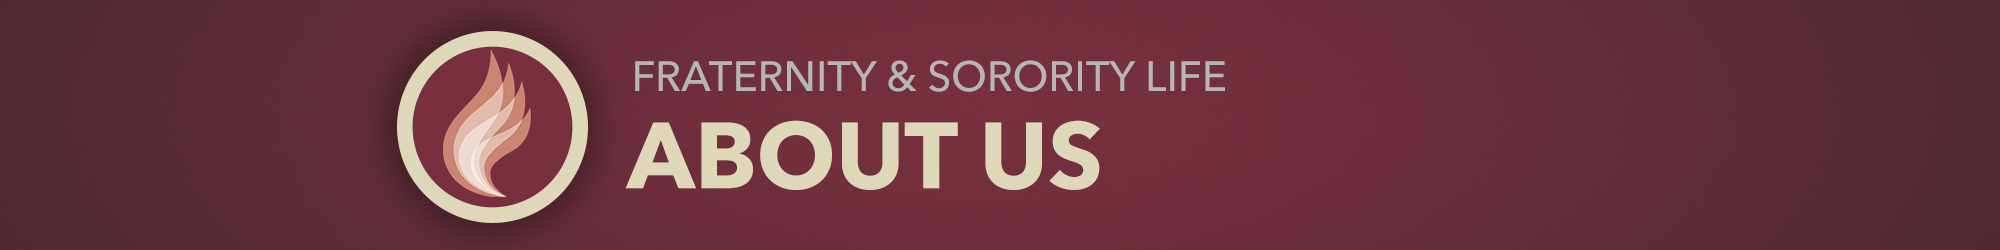 About us banner